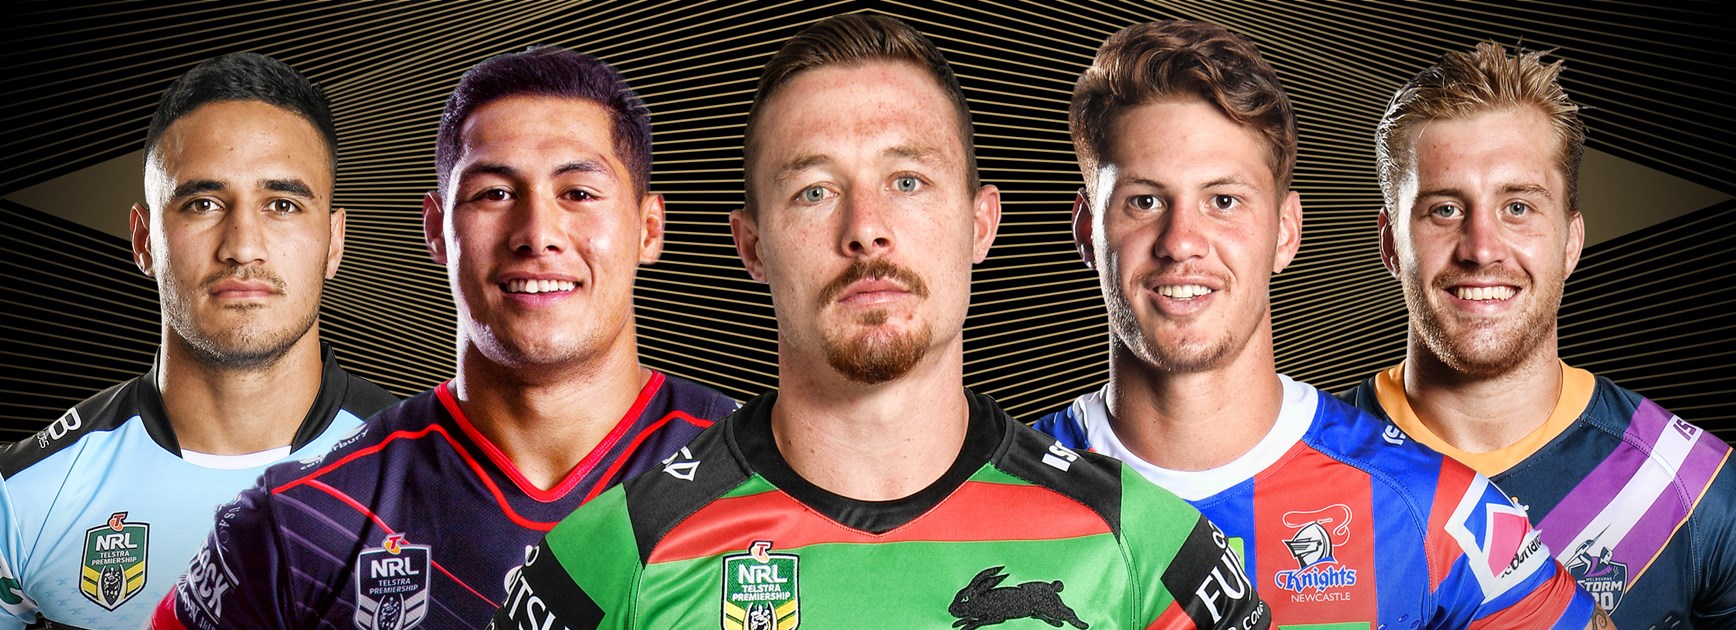 Dally M Medal winner experts have their say